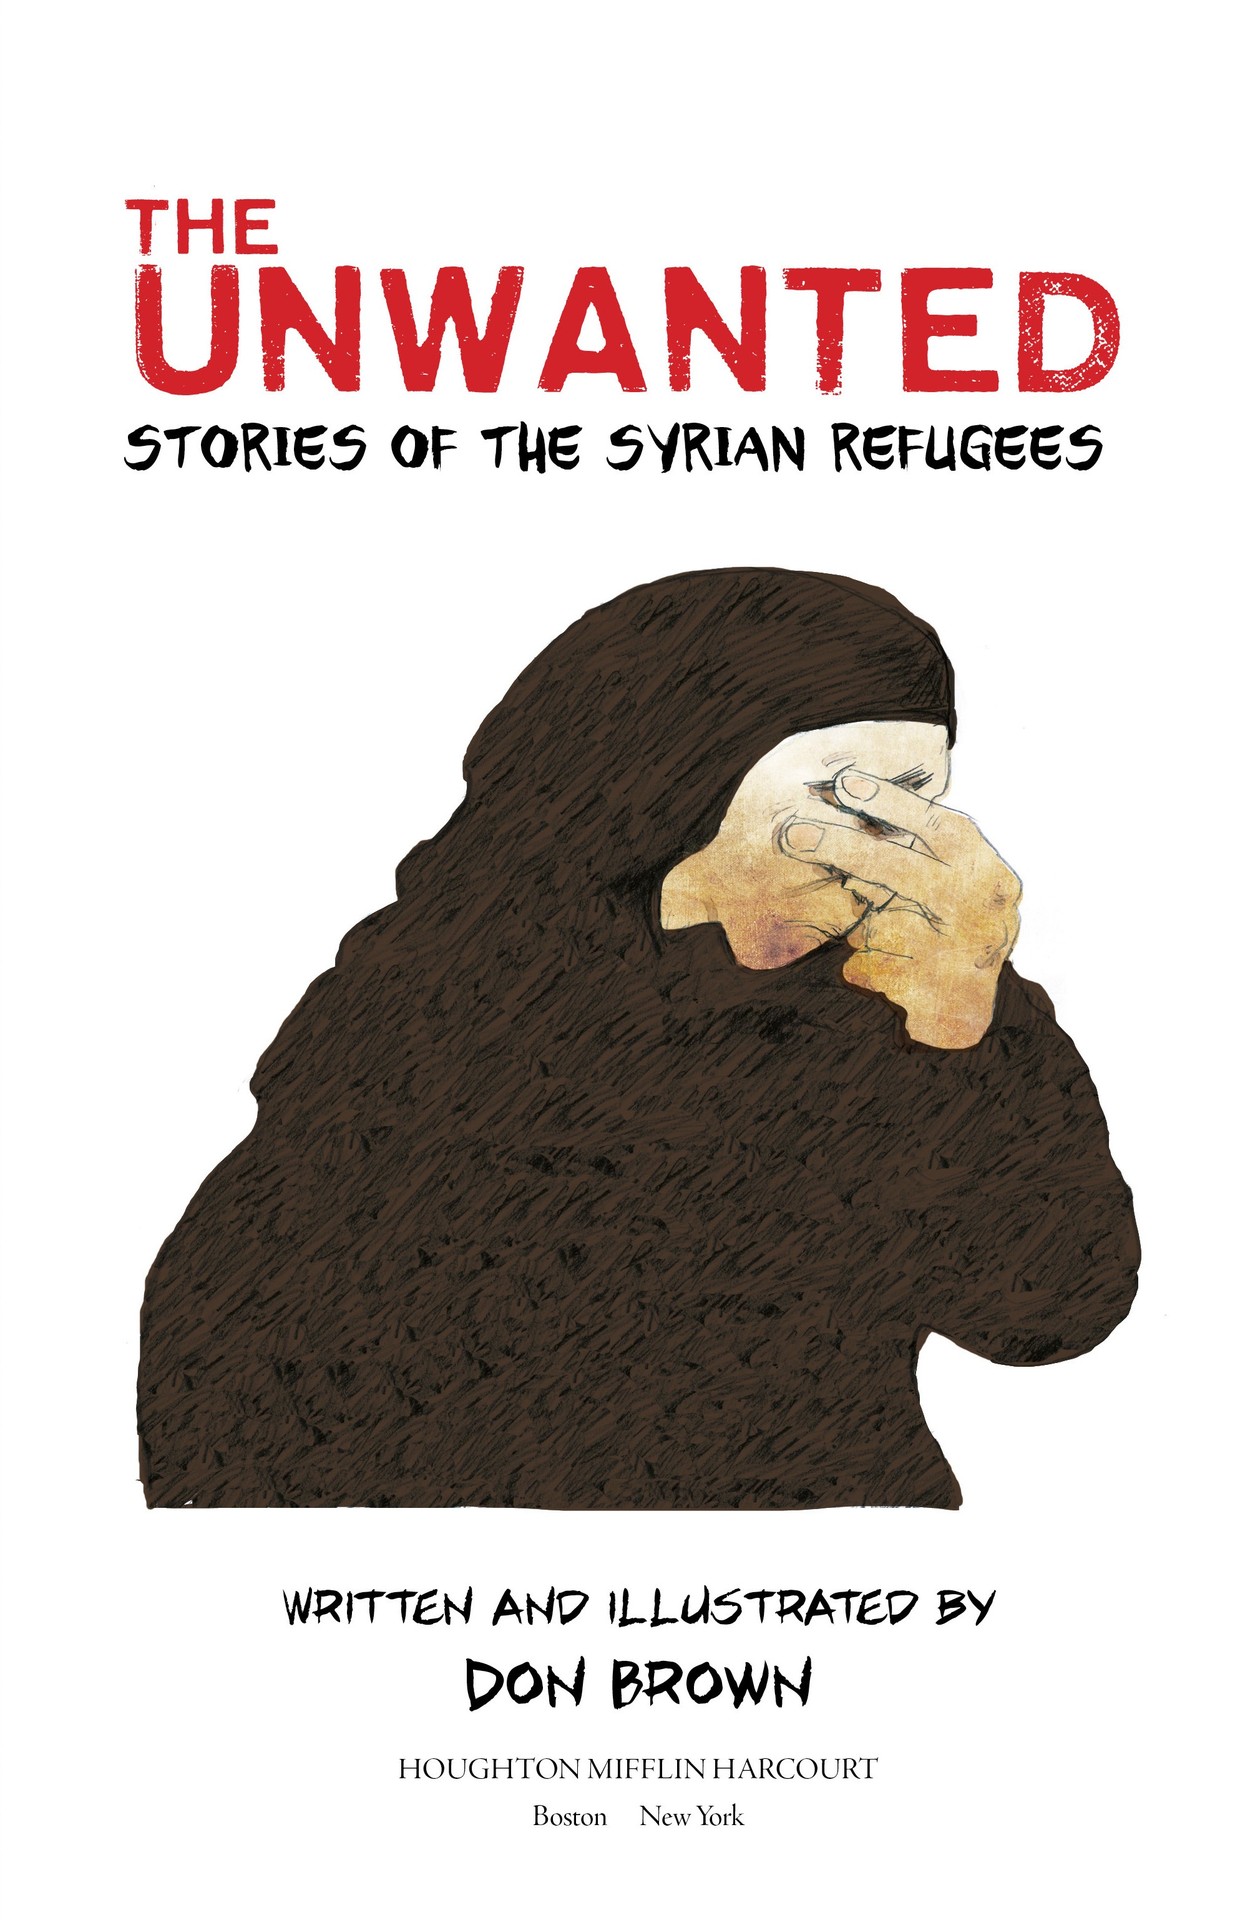 Read online The Unwanted: Stories of the Syrian Refugees comic -  Issue # TPB - 2